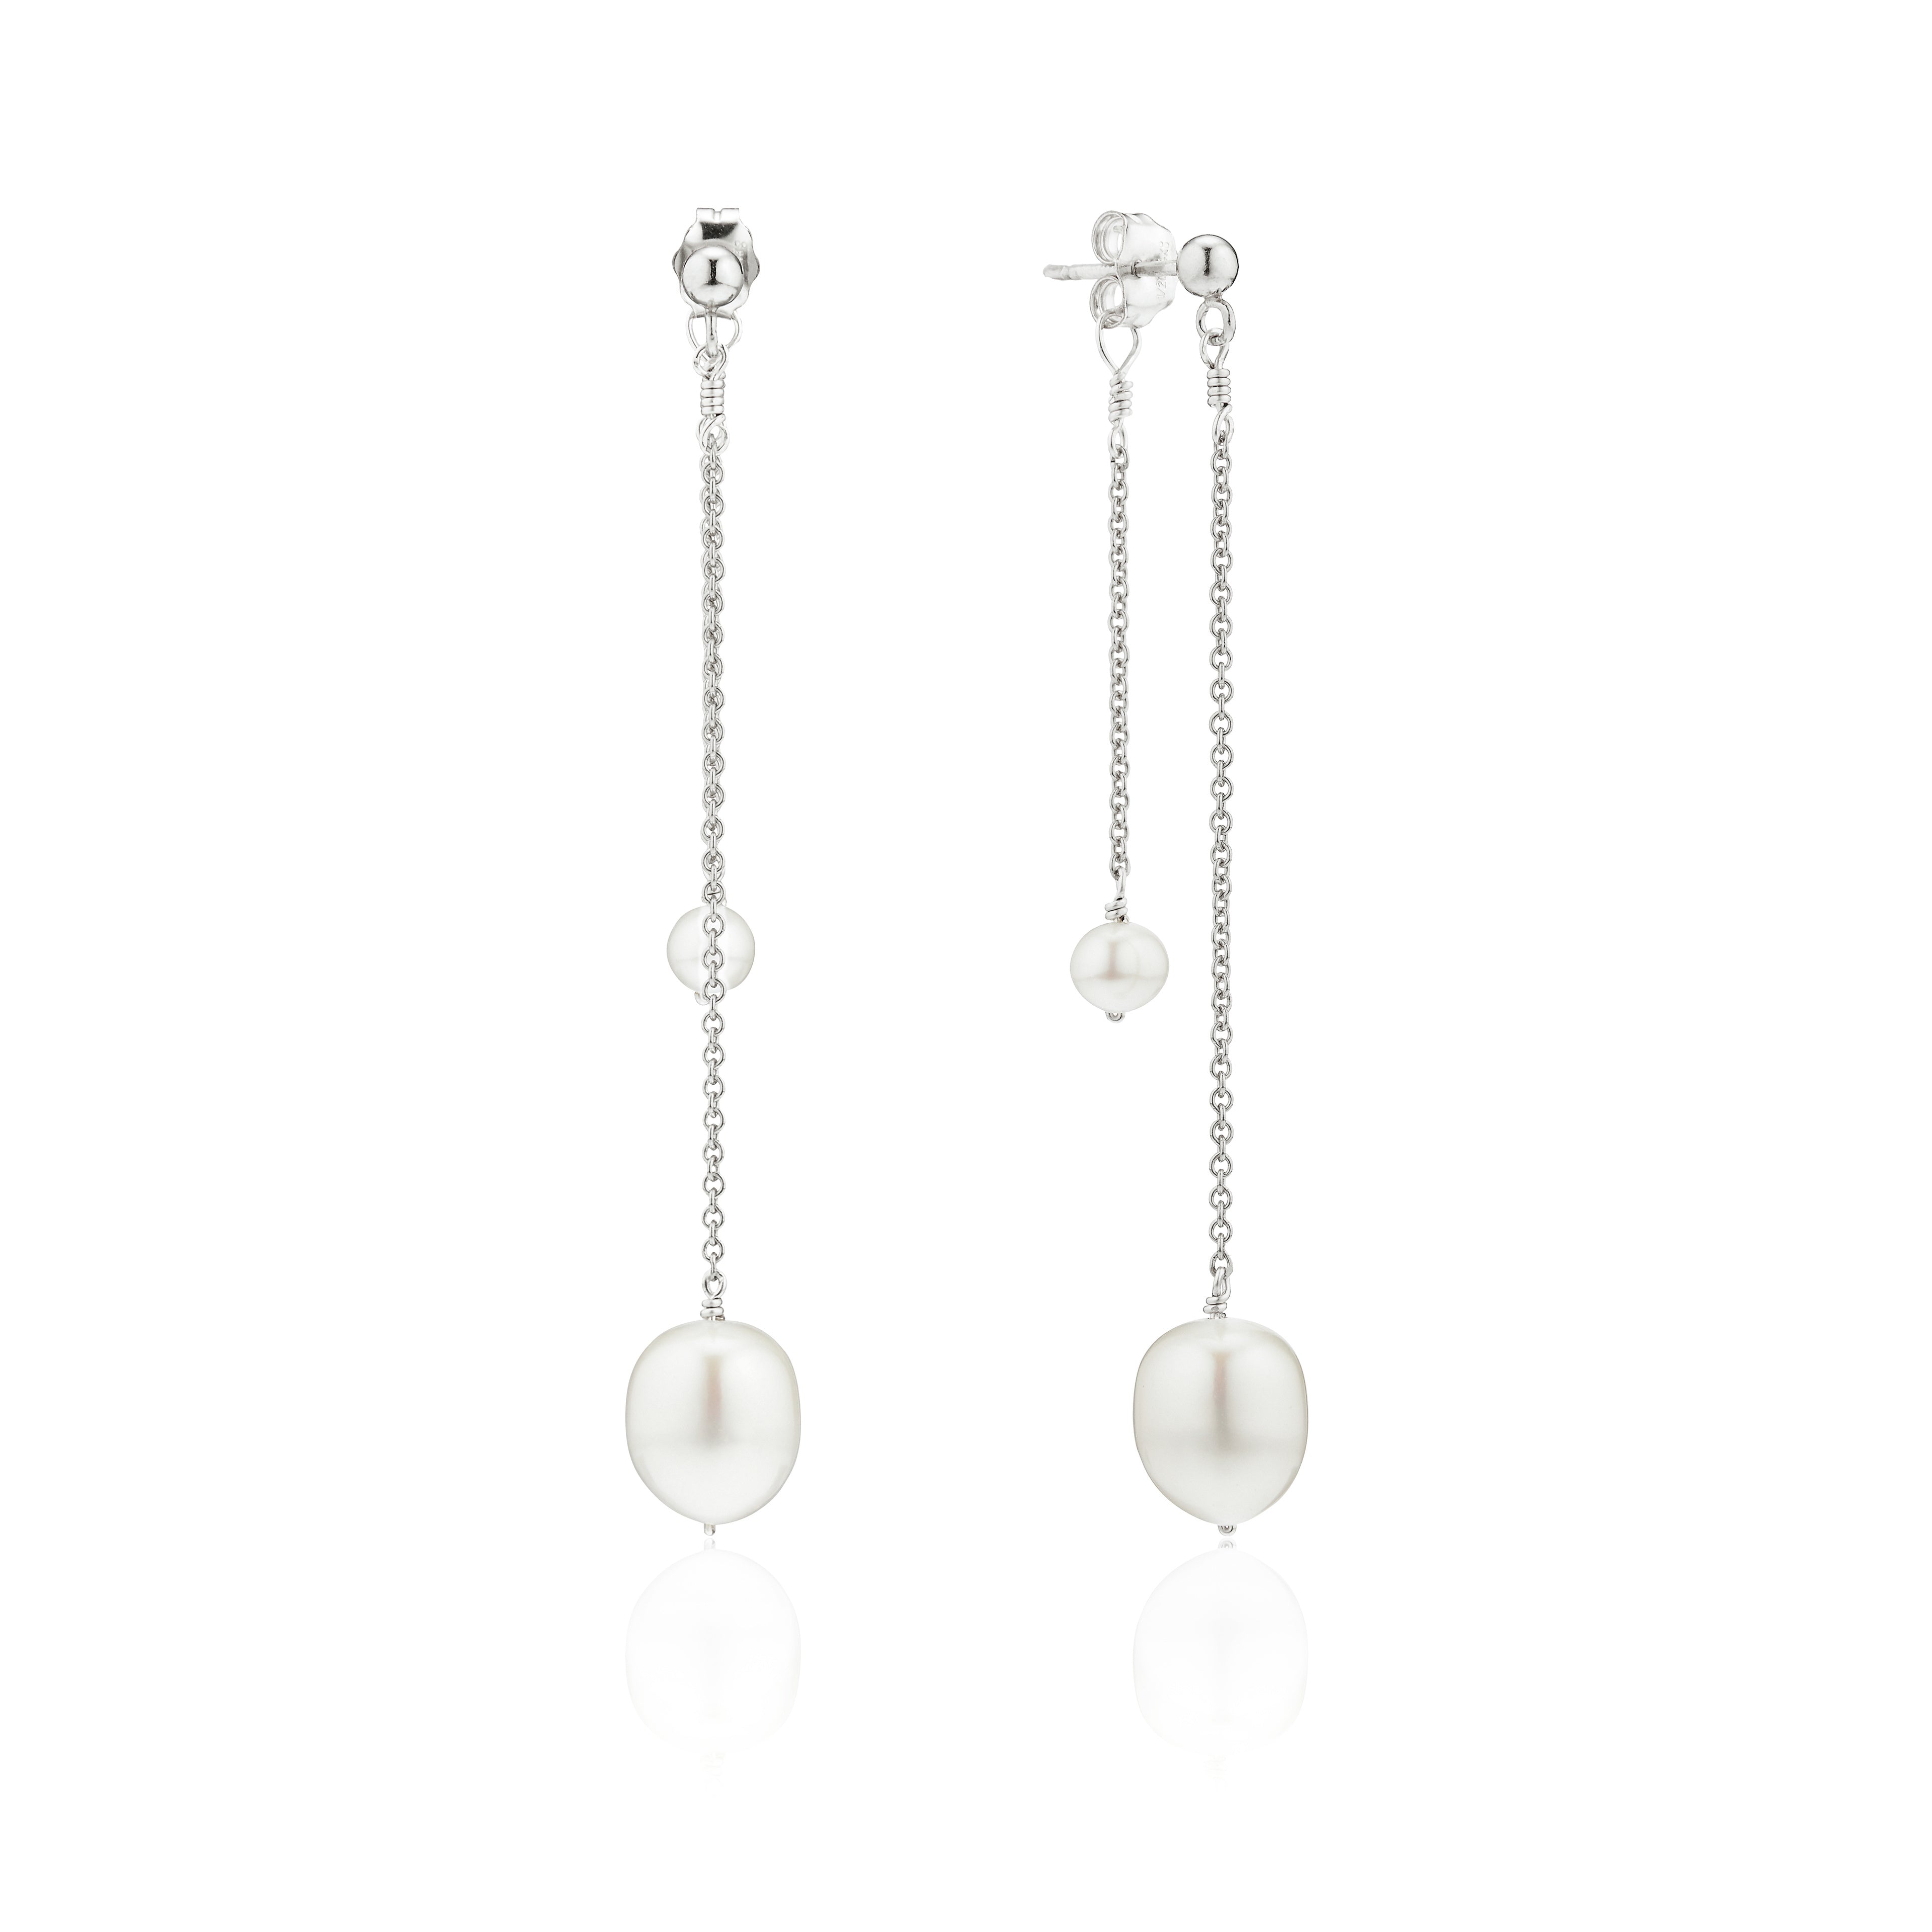 Solid White Gold Layered Large and Small Pearl Earrings